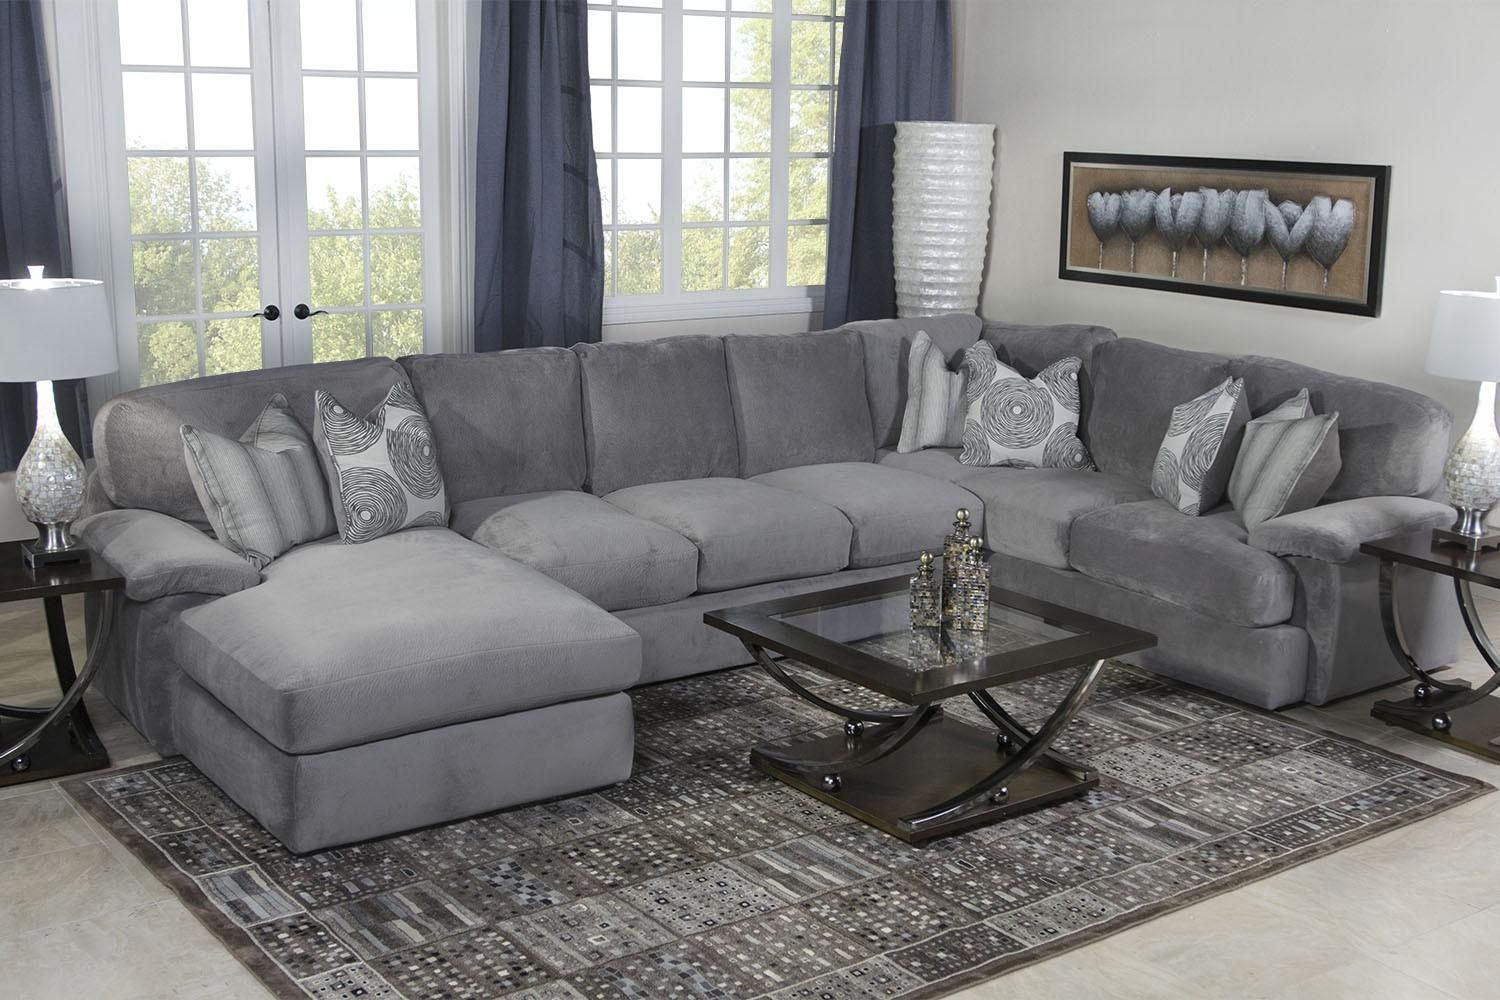 Key West Sectional Living Room In Gray | Mor Furniture For Less Intended For Media Sofa Sectionals (Photo 2 of 20)